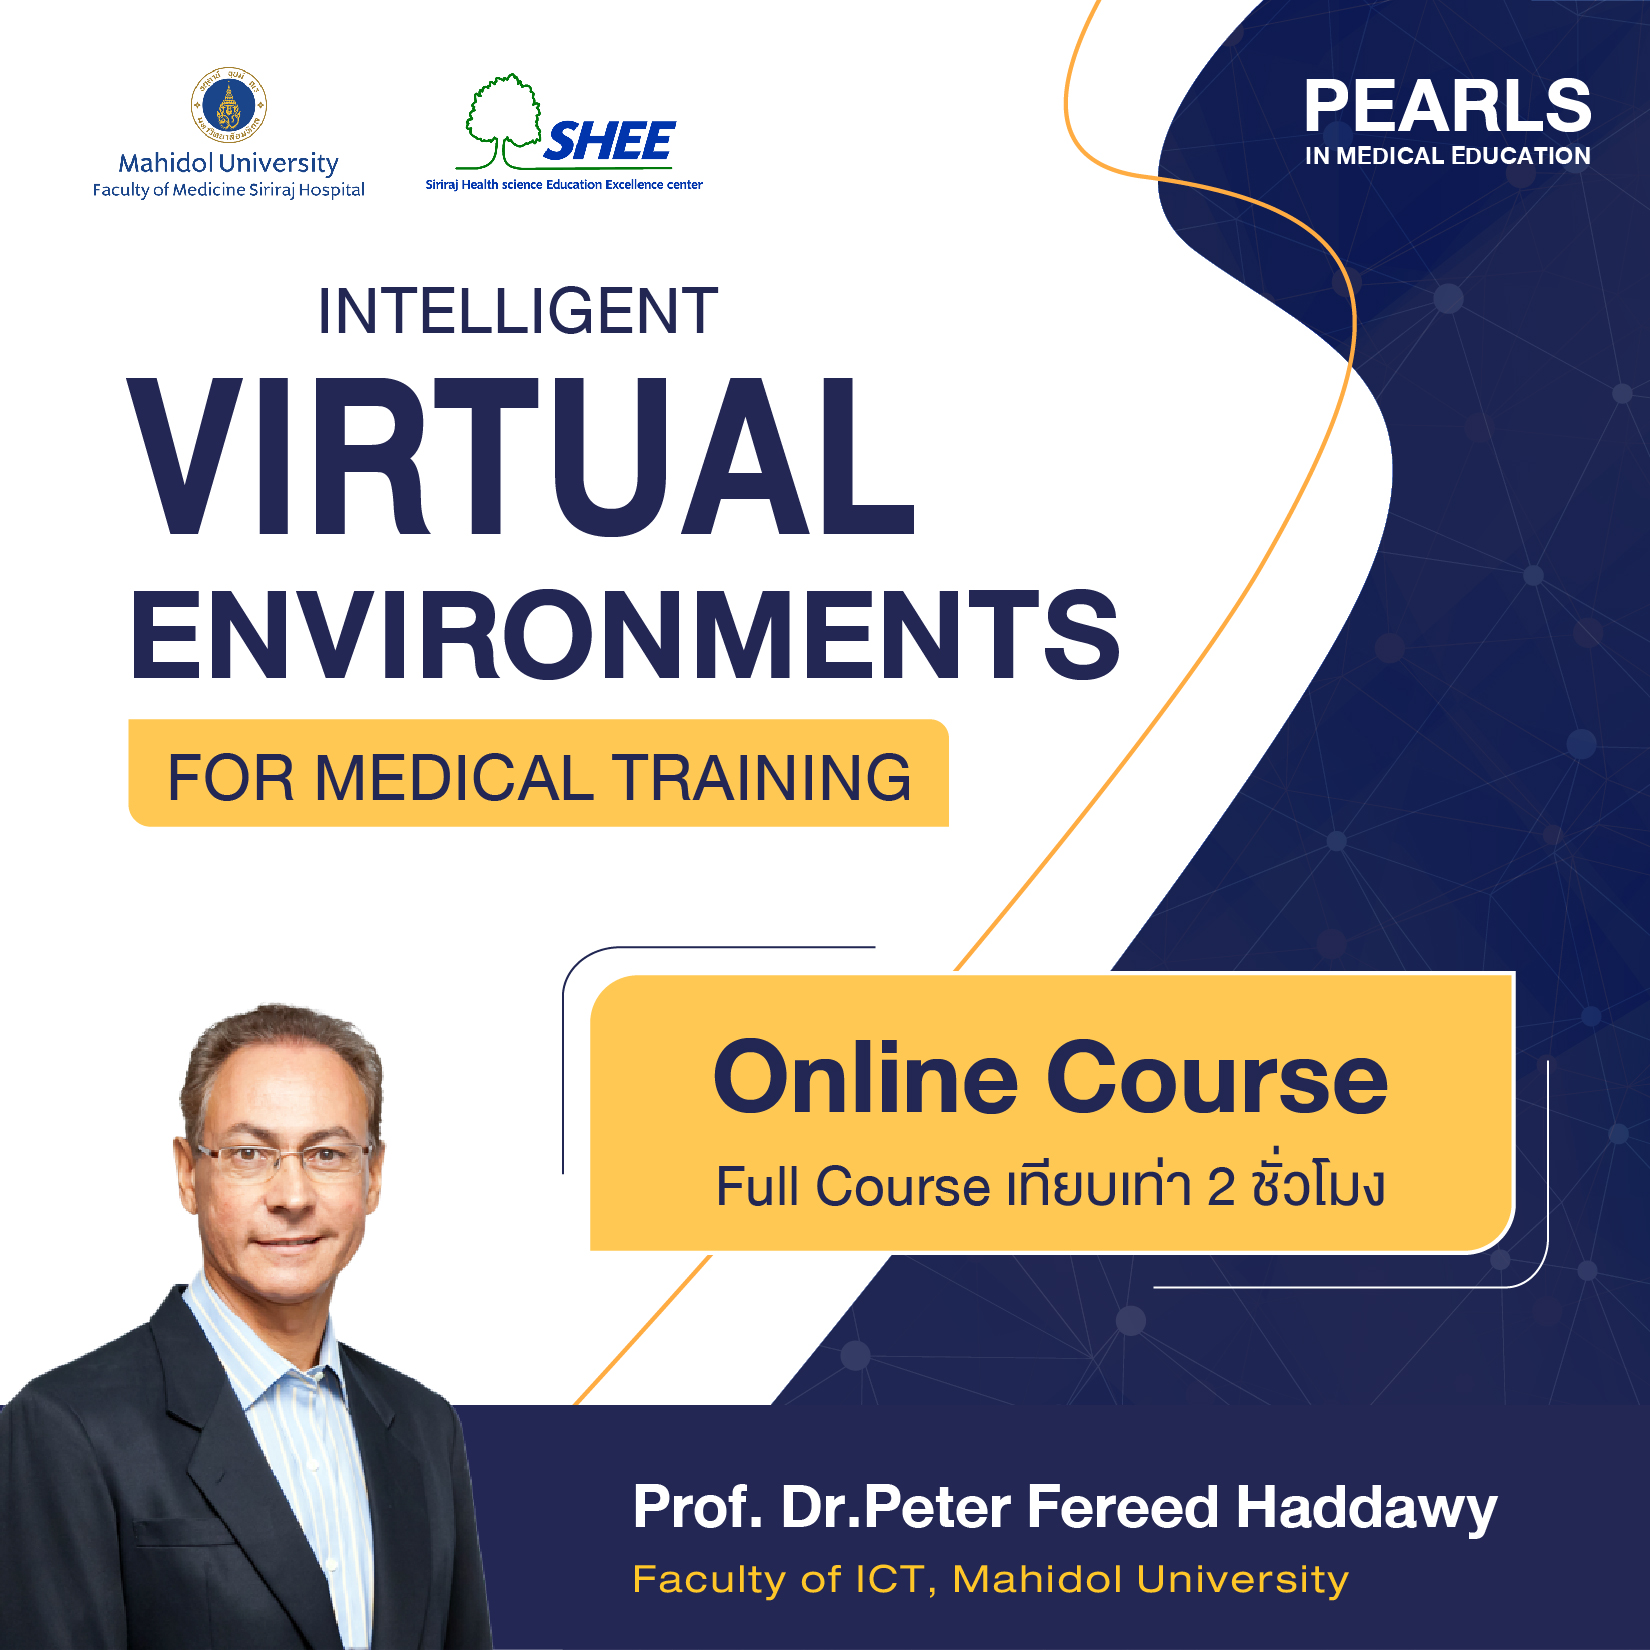 Intelligent virtual environments for medical training (in English)